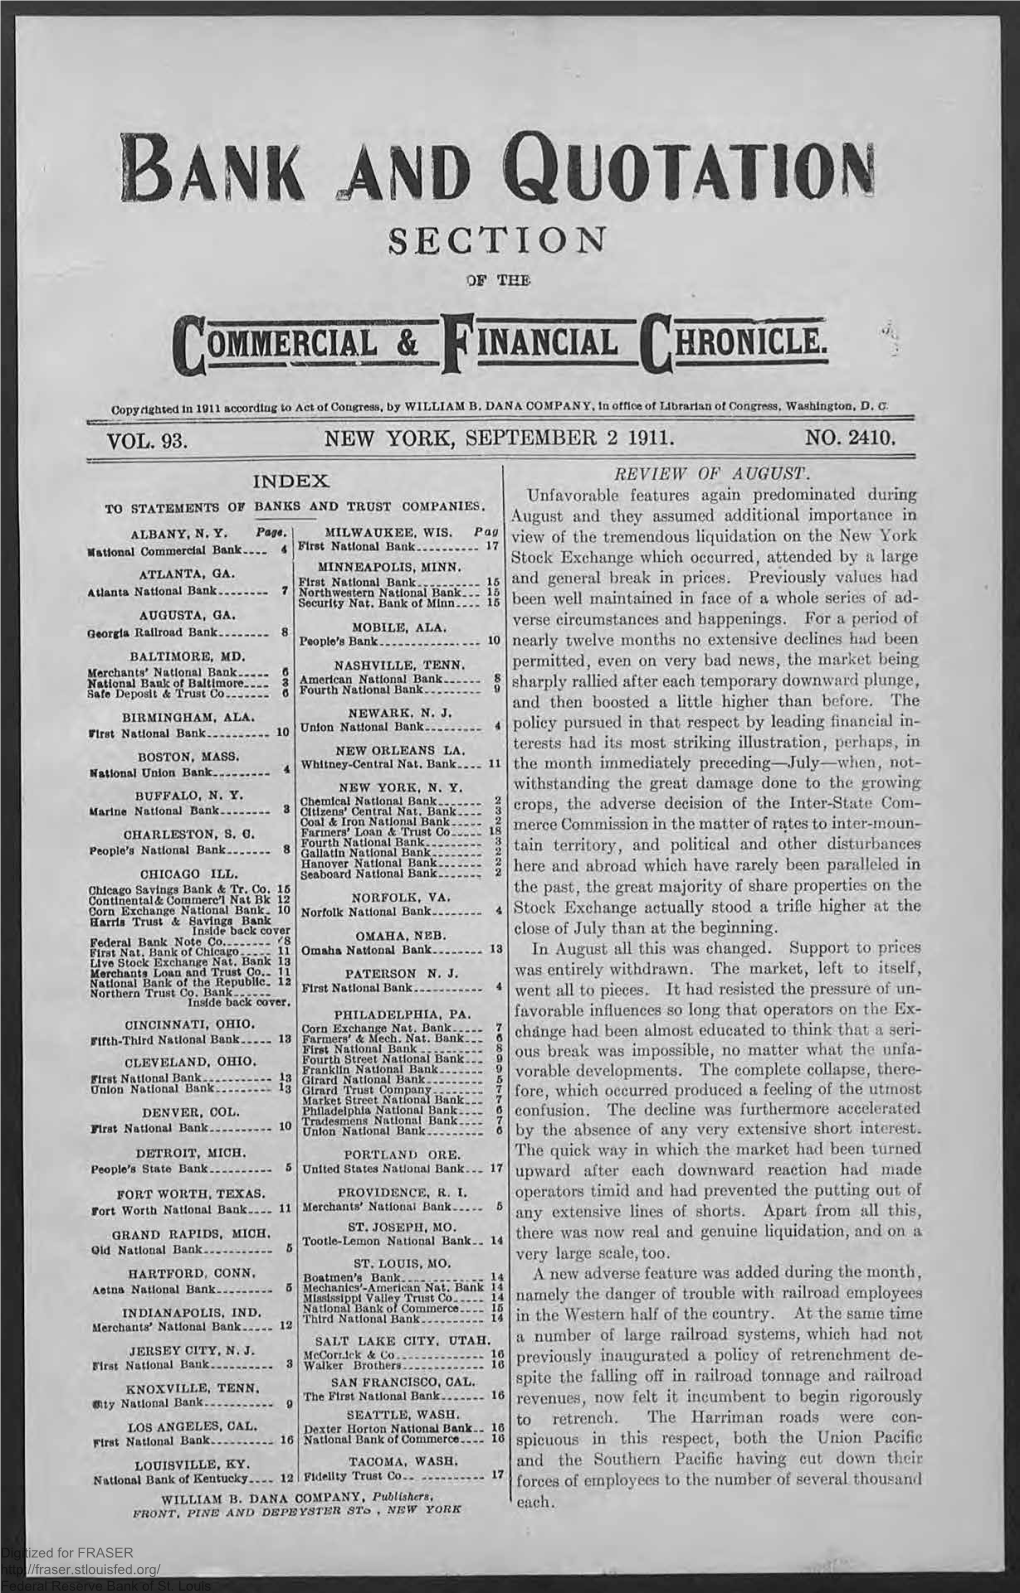 September 2, 1911 : Bank and Quotation Section